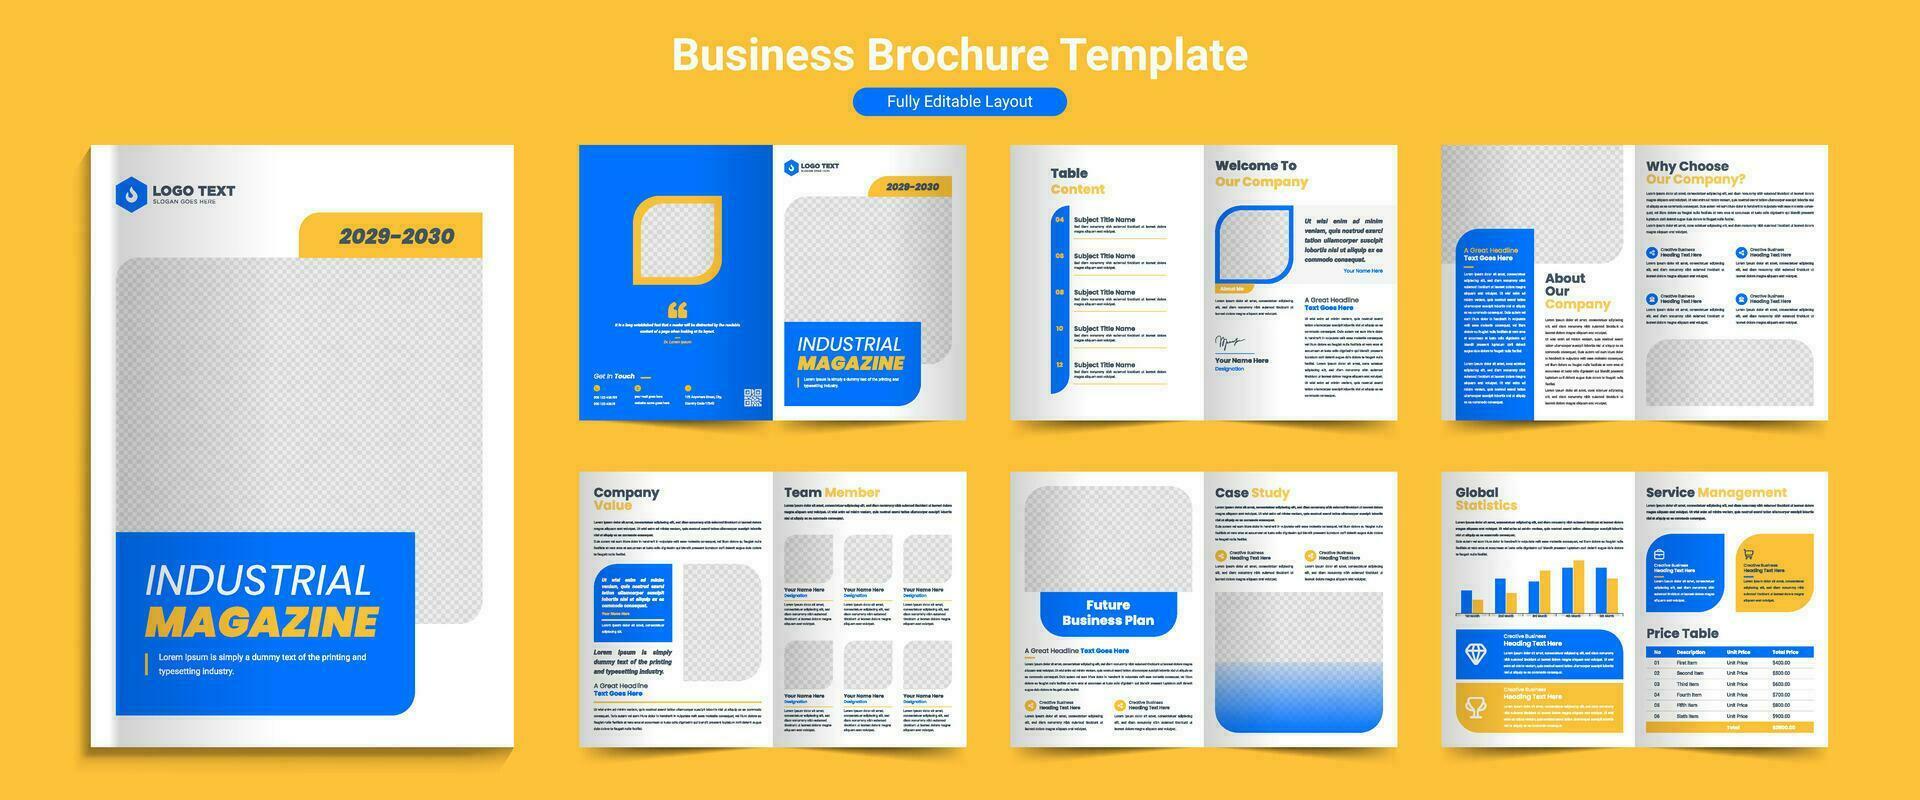 Industrial company magazine business profile brochure layout template design vector